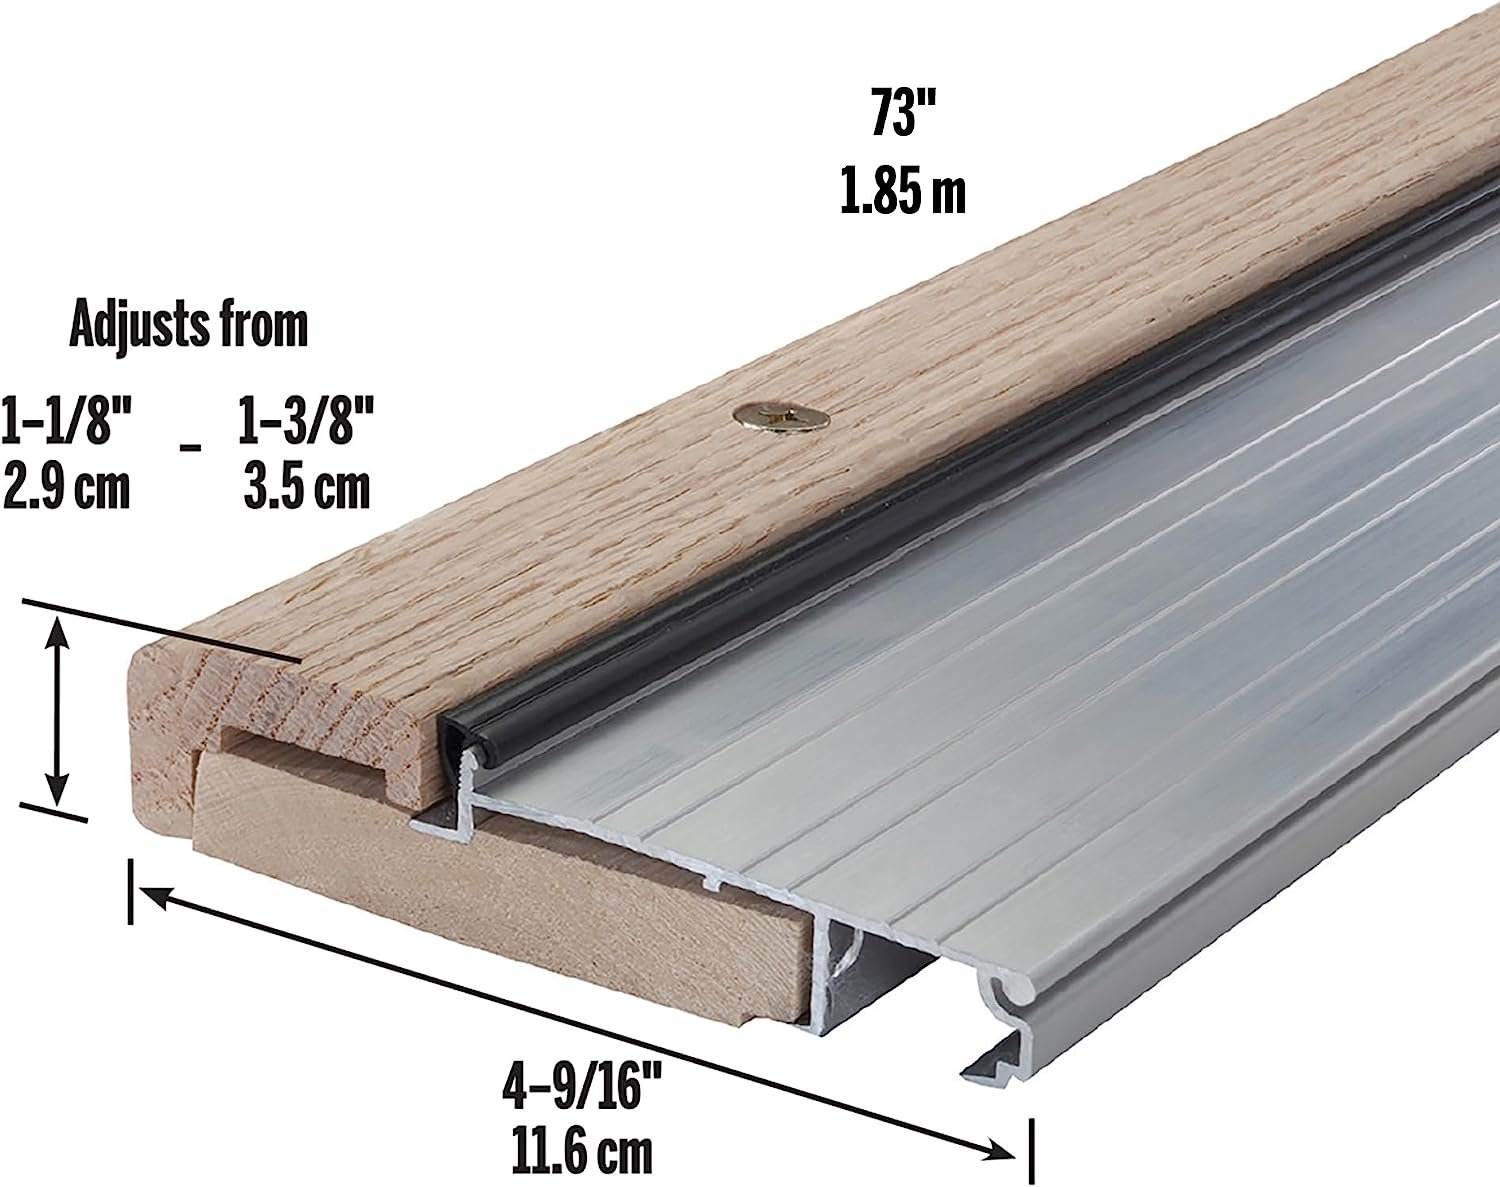 M-D Building Products 76281 4-9/16 in. x 1-1/8 in. x 73 in. Silver Adjustable Aluminum & Hardwood Threshold - image 2 of 4